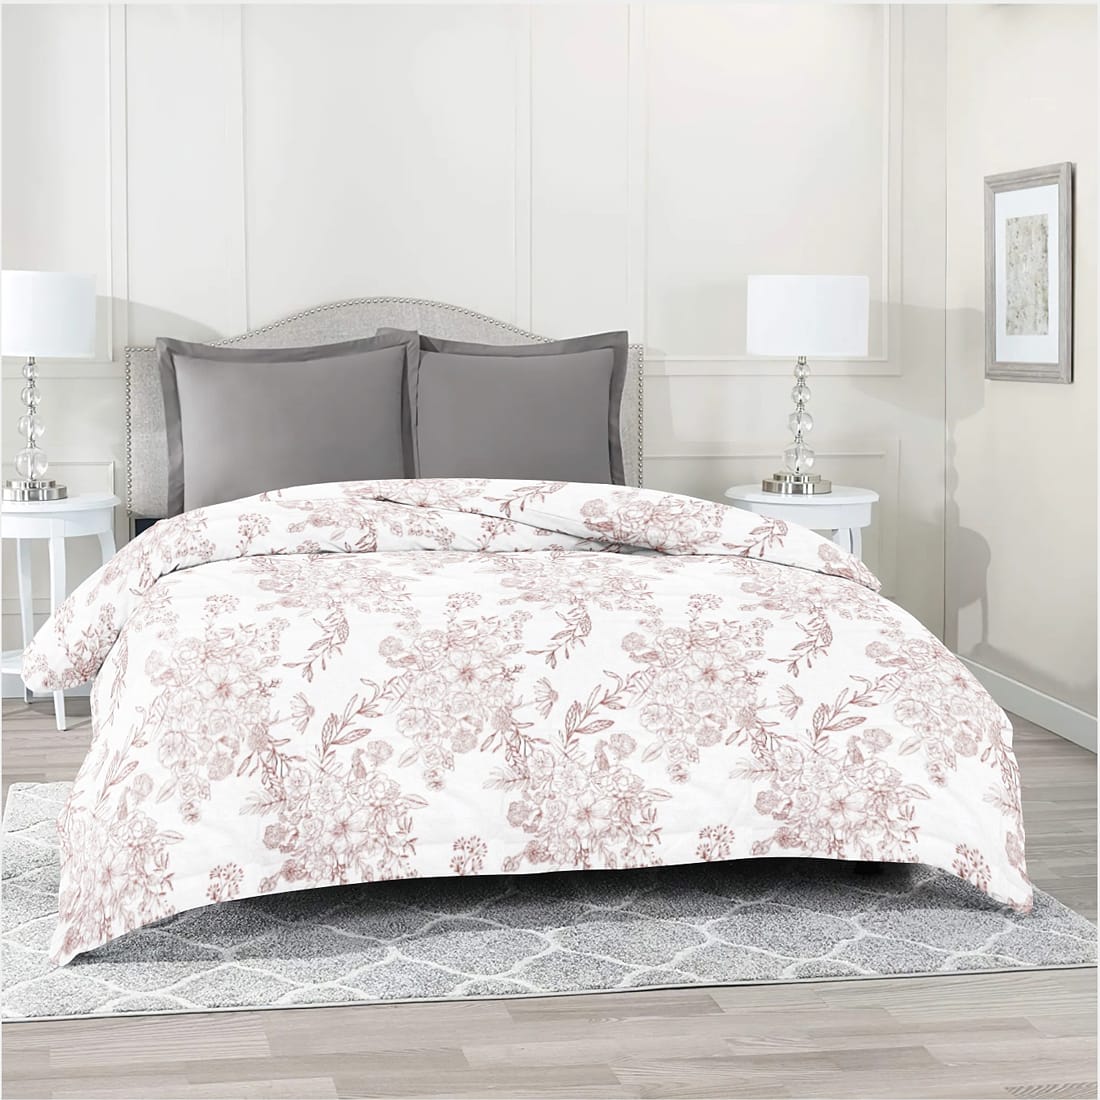 Comfy 250 TC Pink Floral Print Cotton Duvet Cover online in India